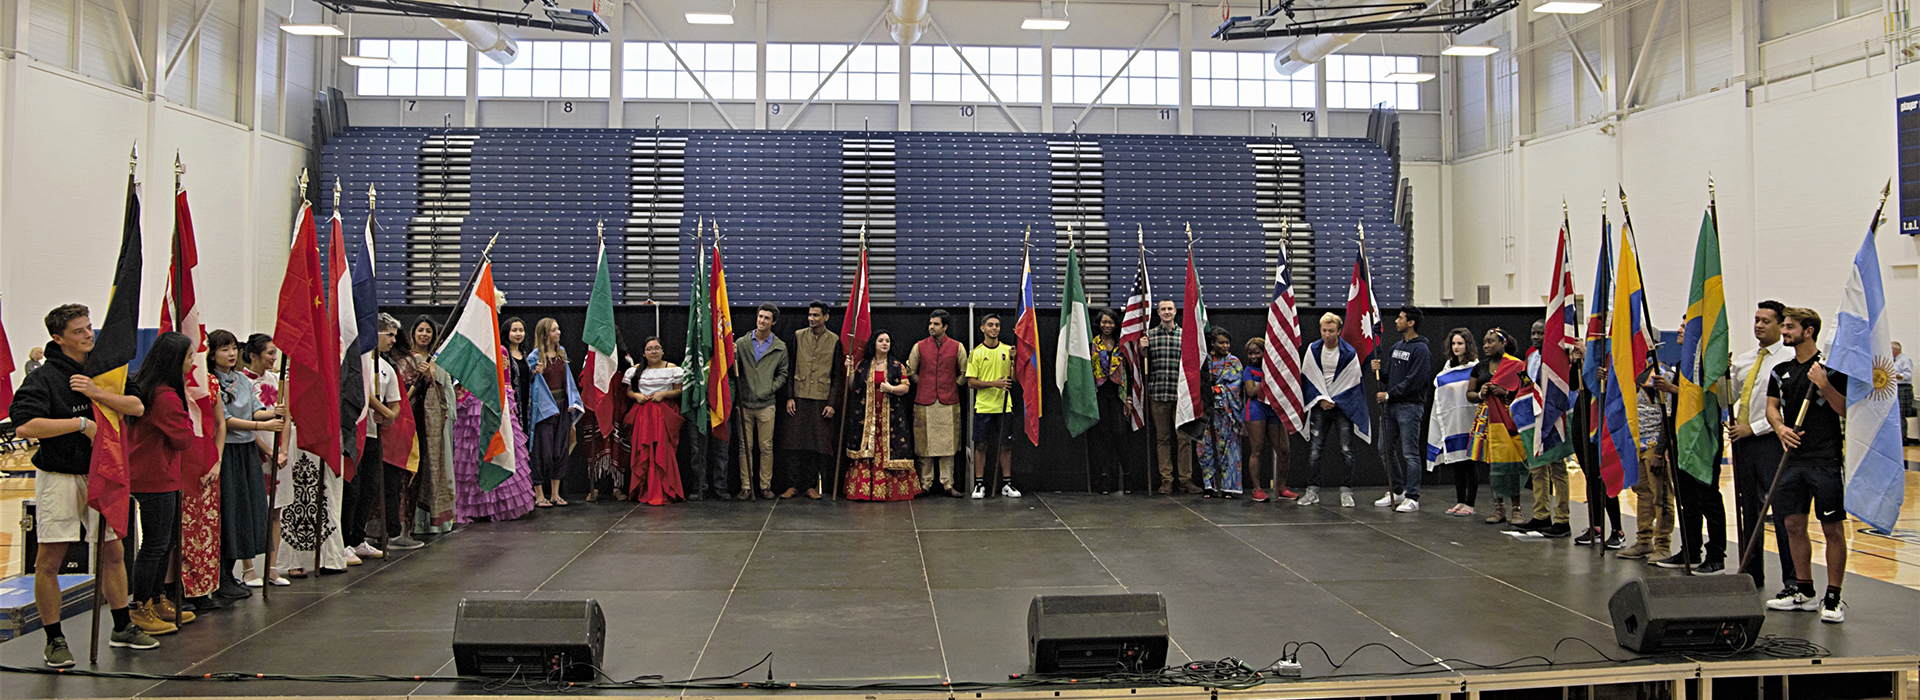 International Students on a stage